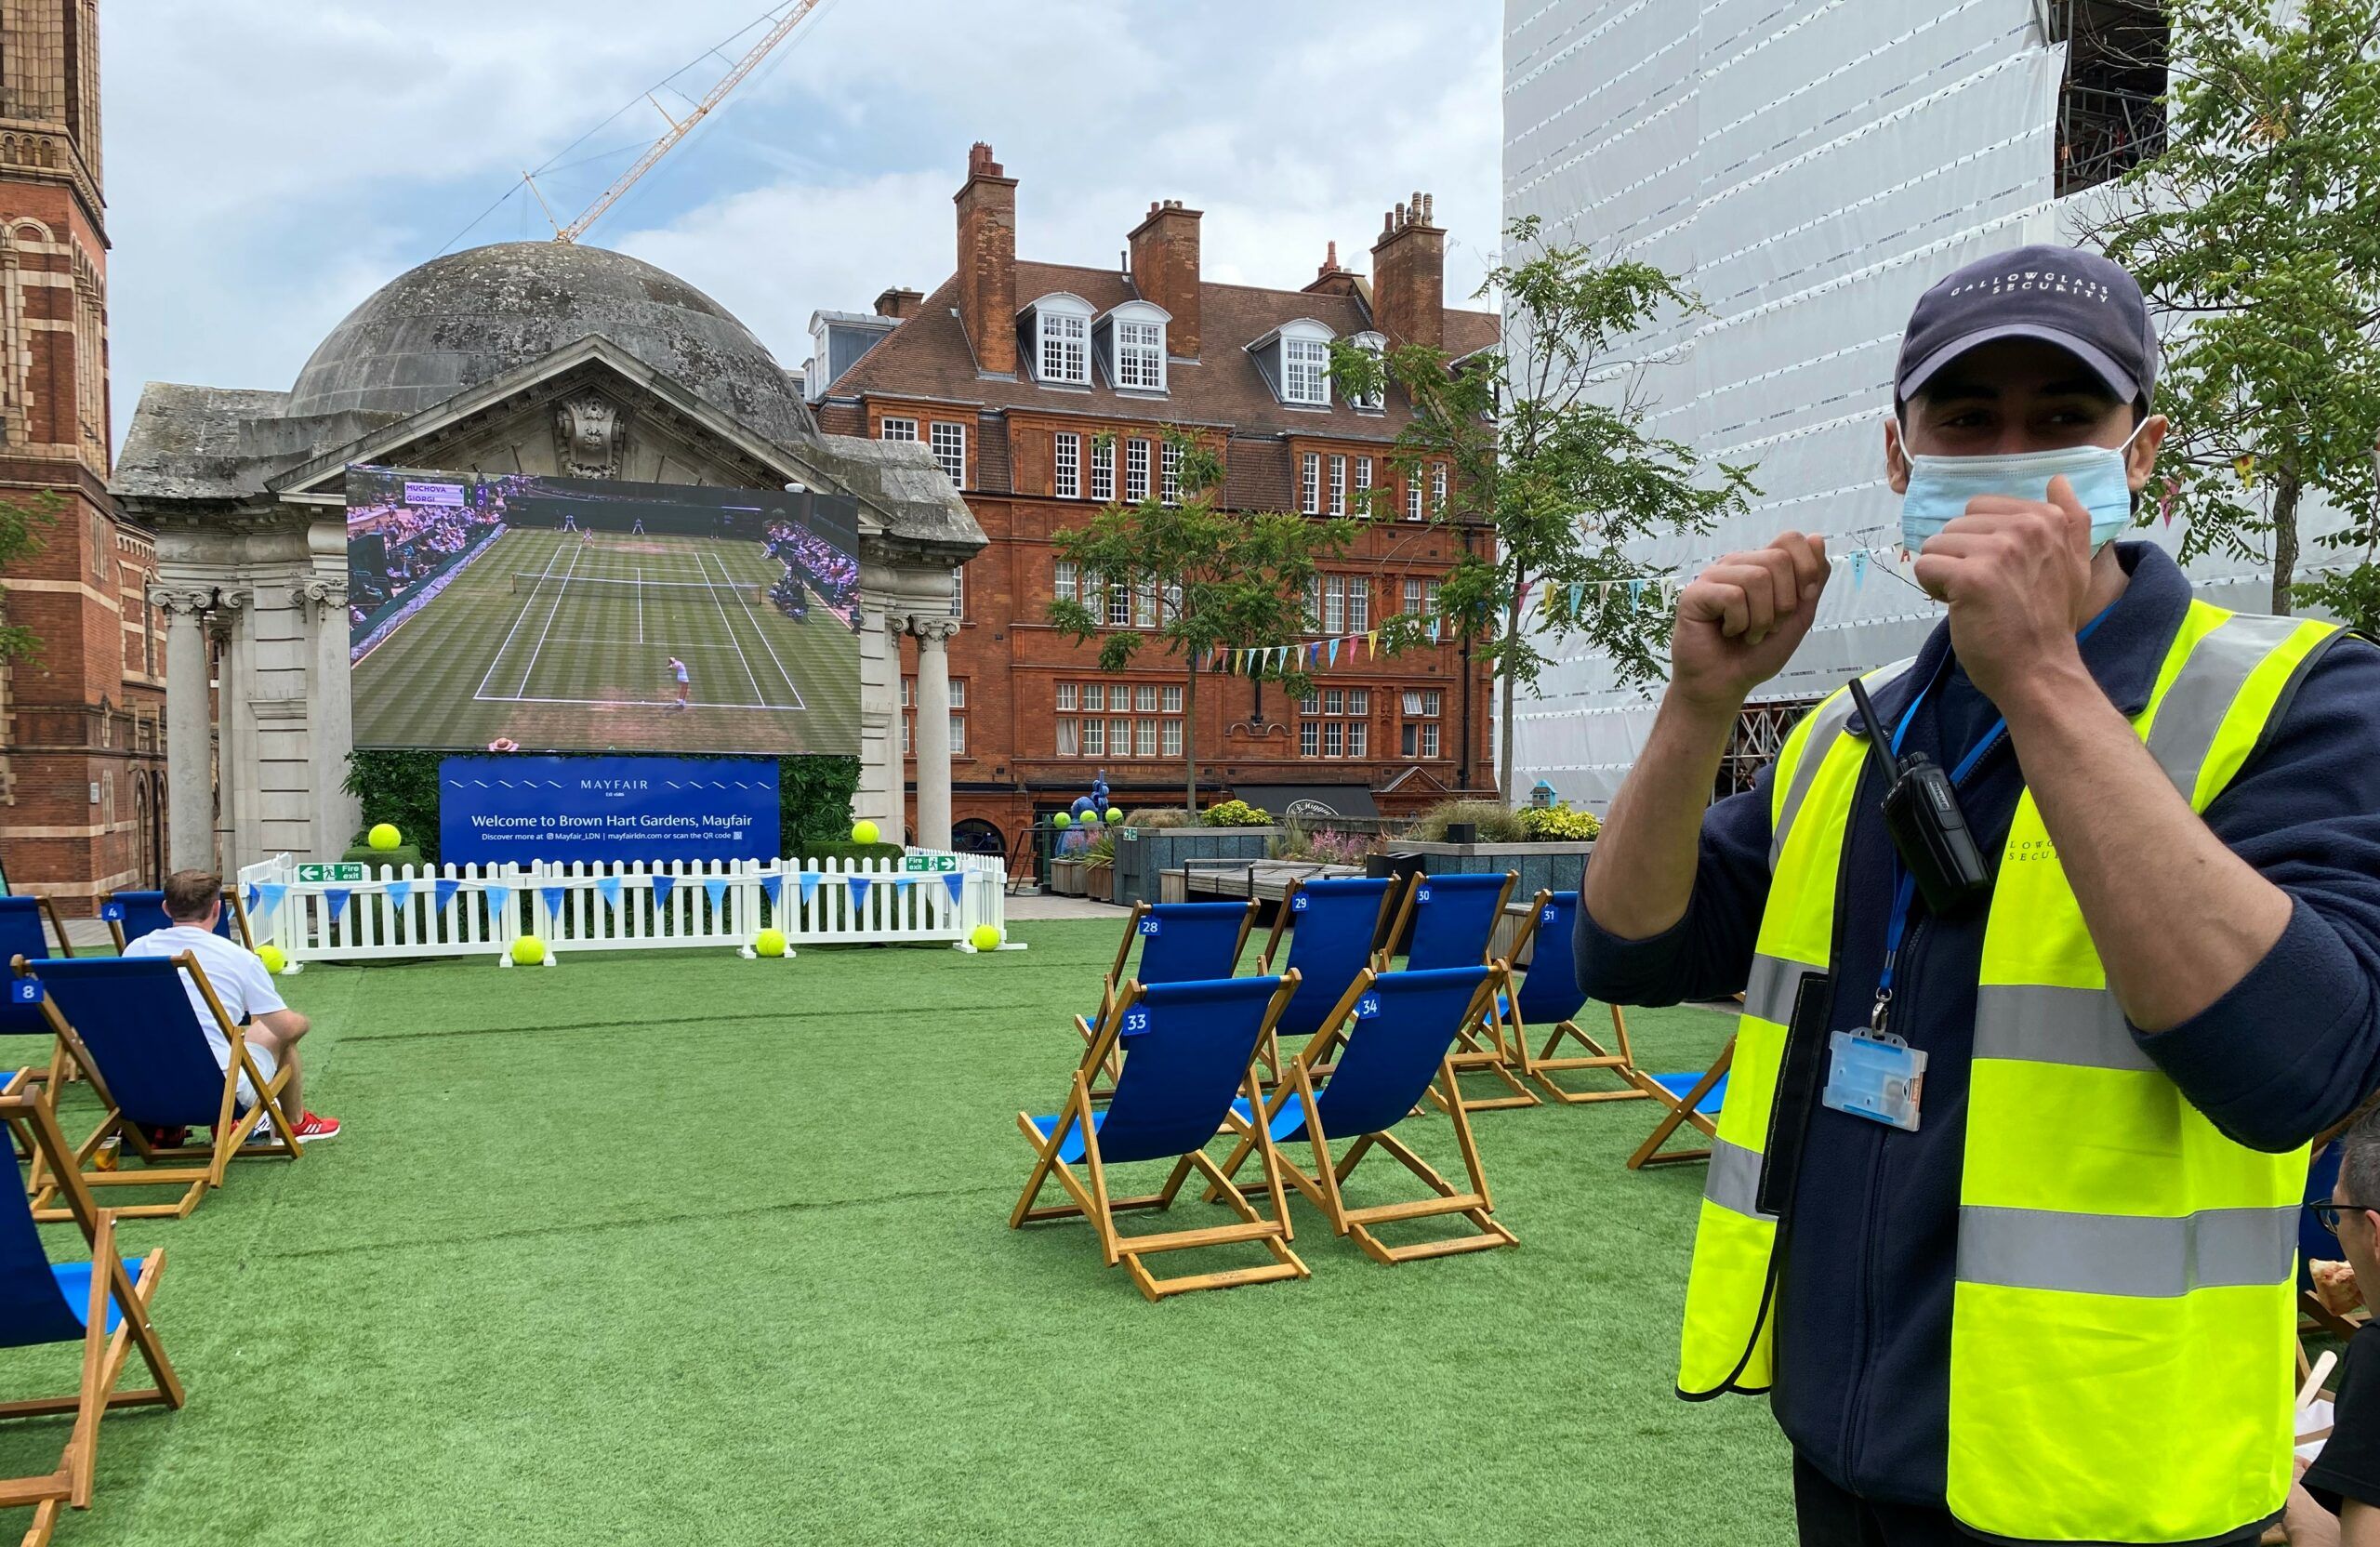 A Gallowglass Security officer on duty at the Wimbledon screening in Brown Hart Gardens in Mayfair.